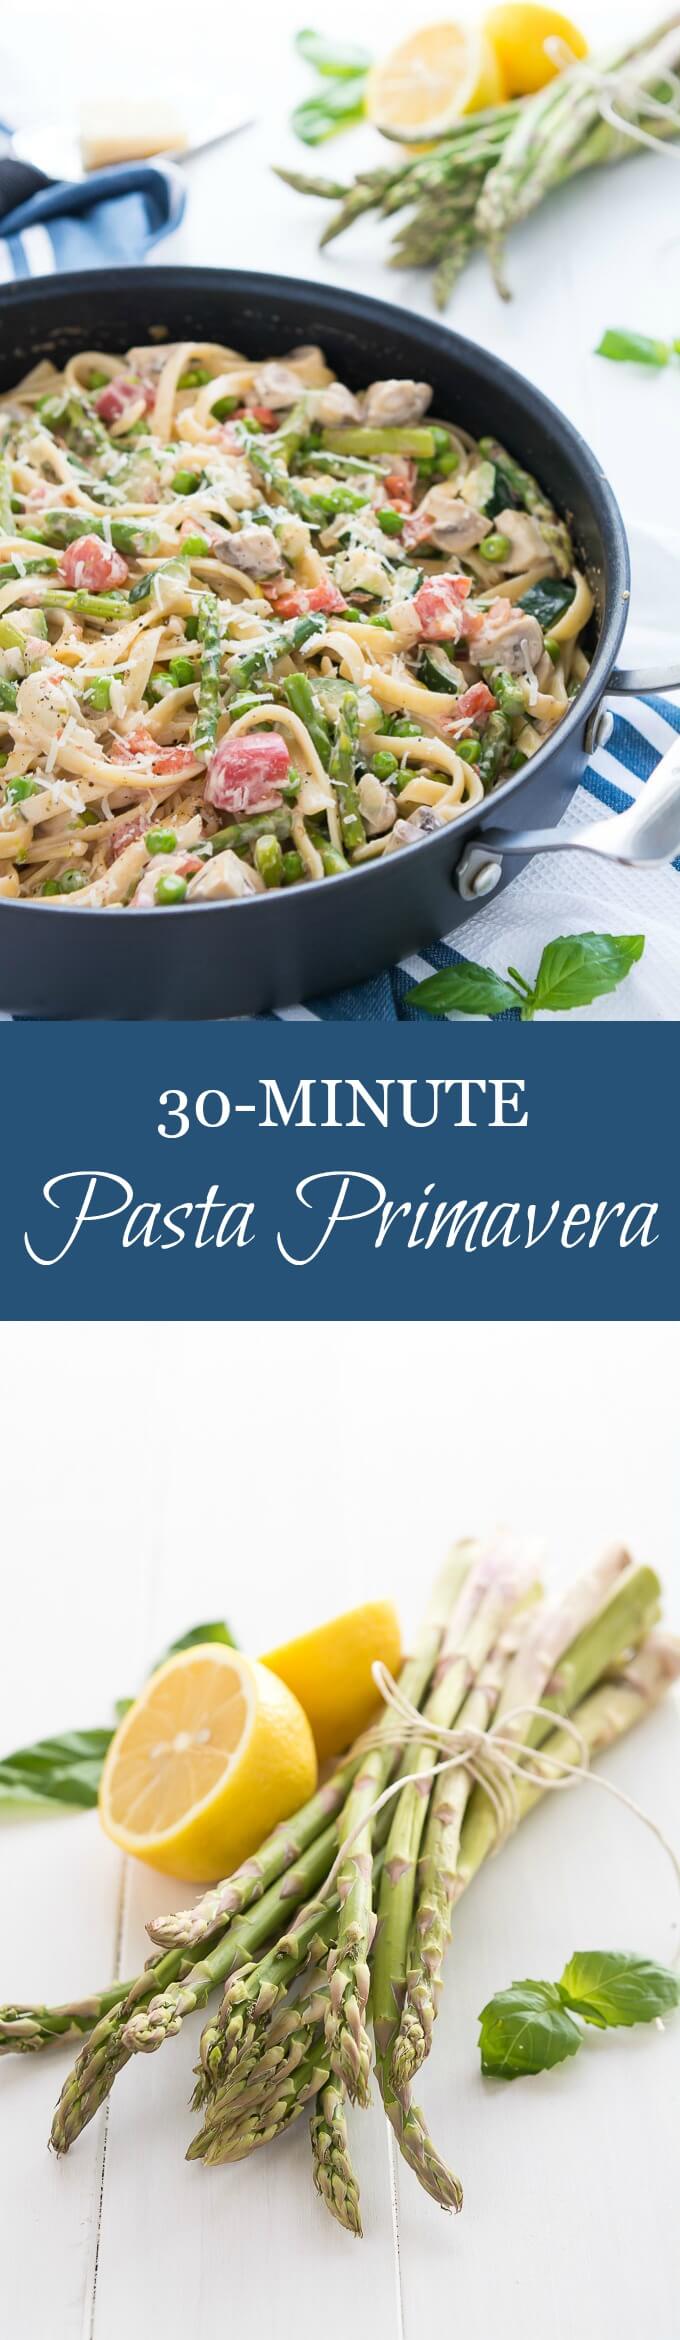  This 30-Minute Pasta Primavera is full of flavor and packed with spring veggies.